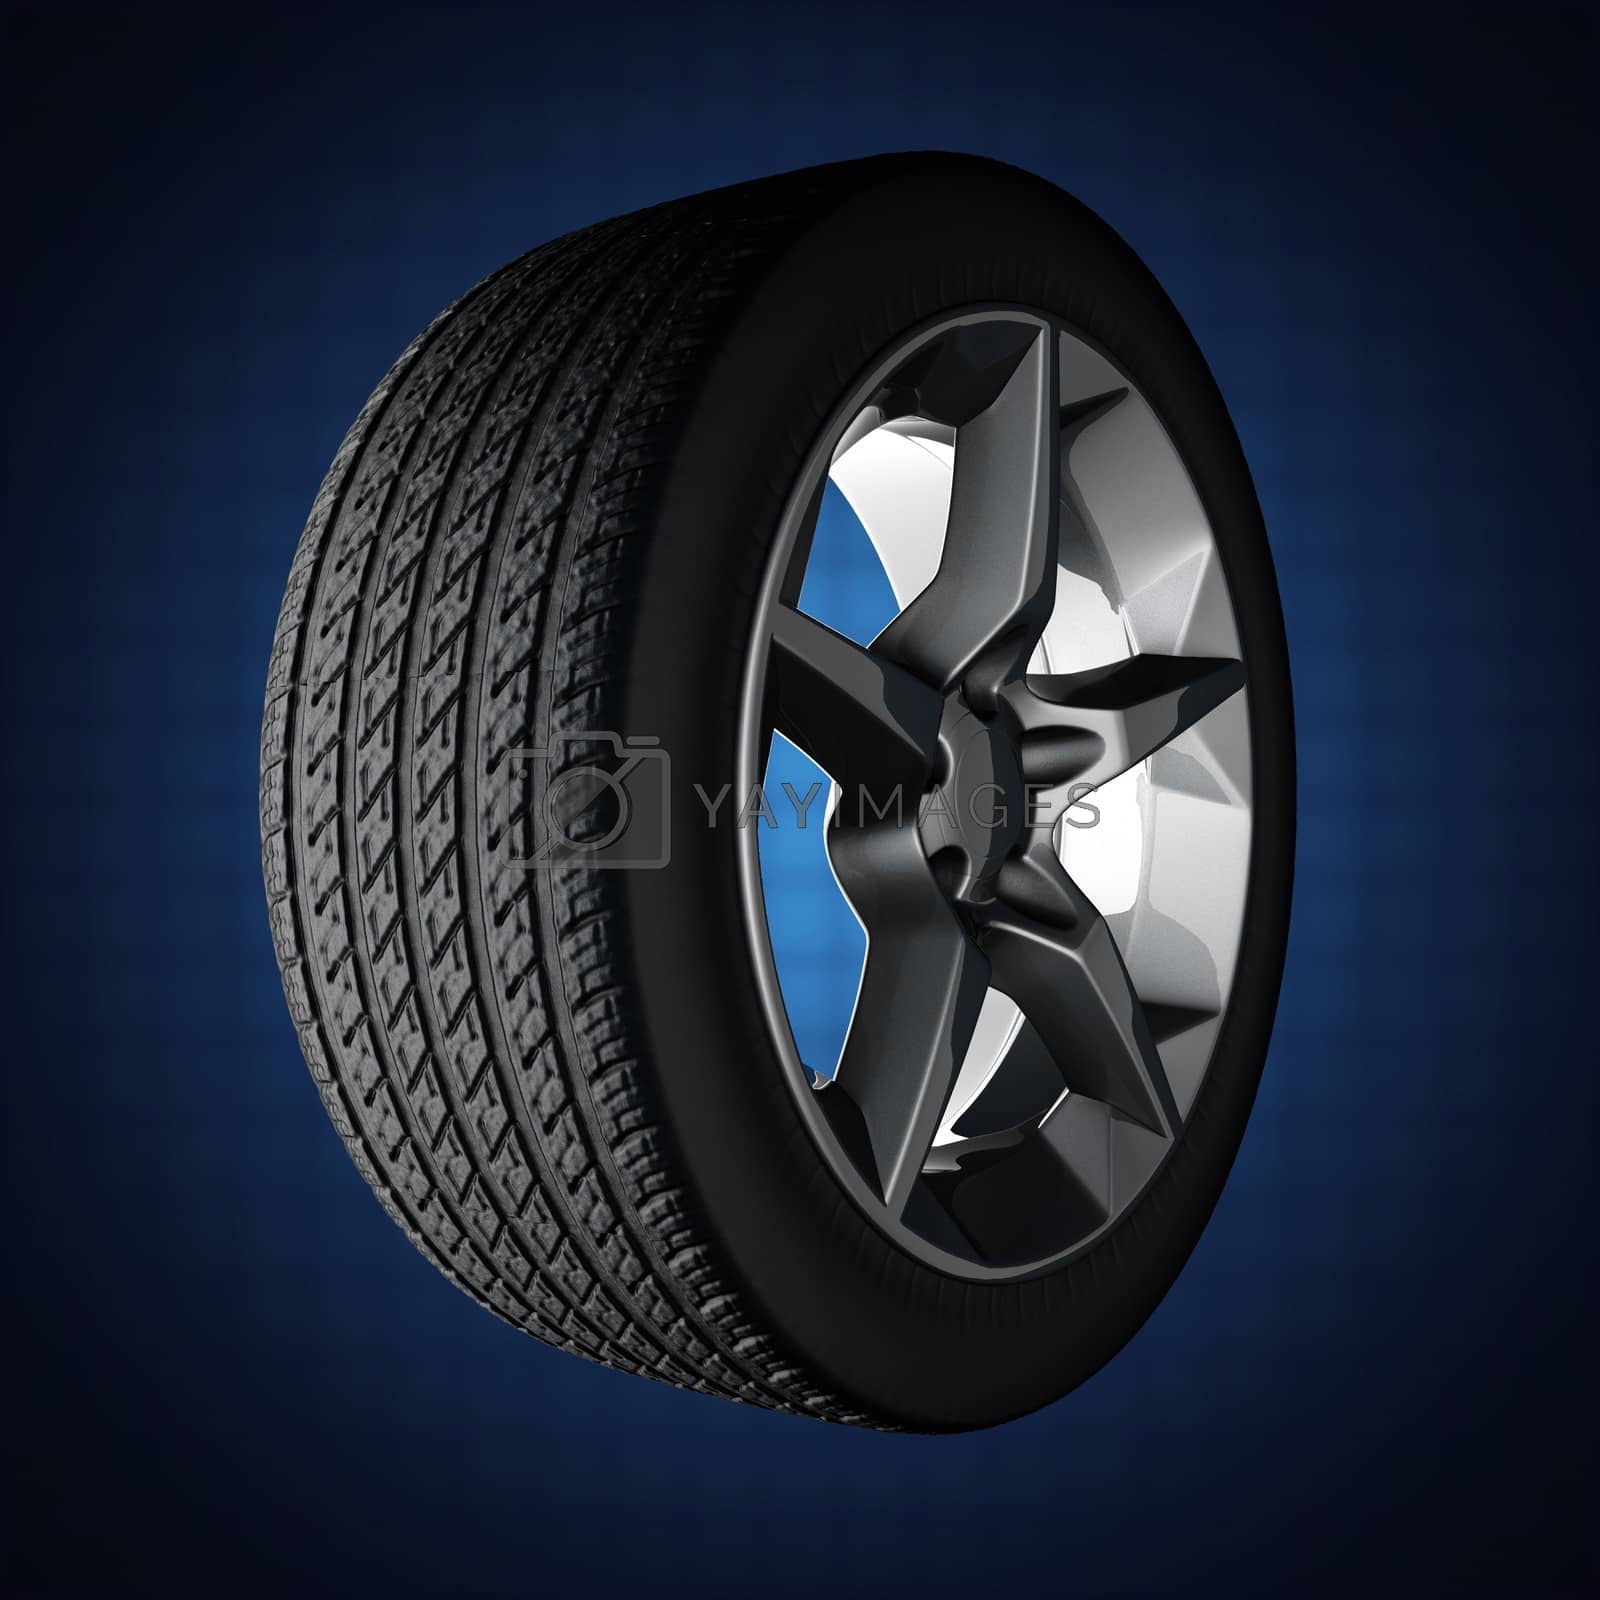 Royalty free image of Car wheel on blue background by videodoctor